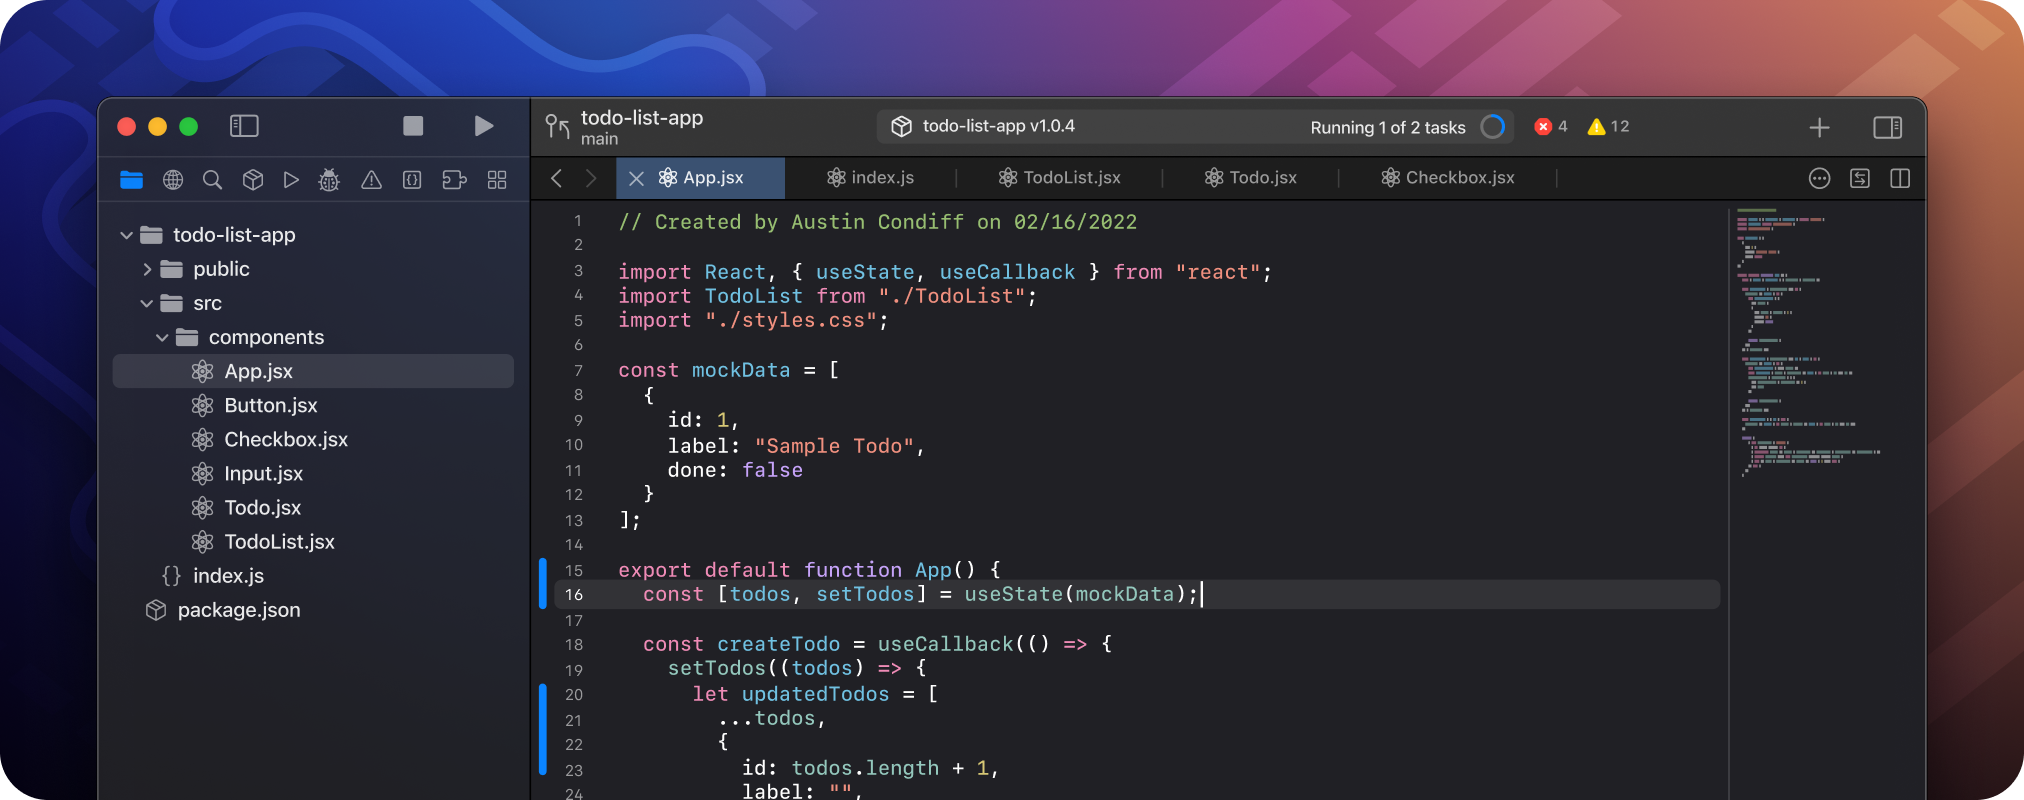 CodeEditNative code and text editor for macOS